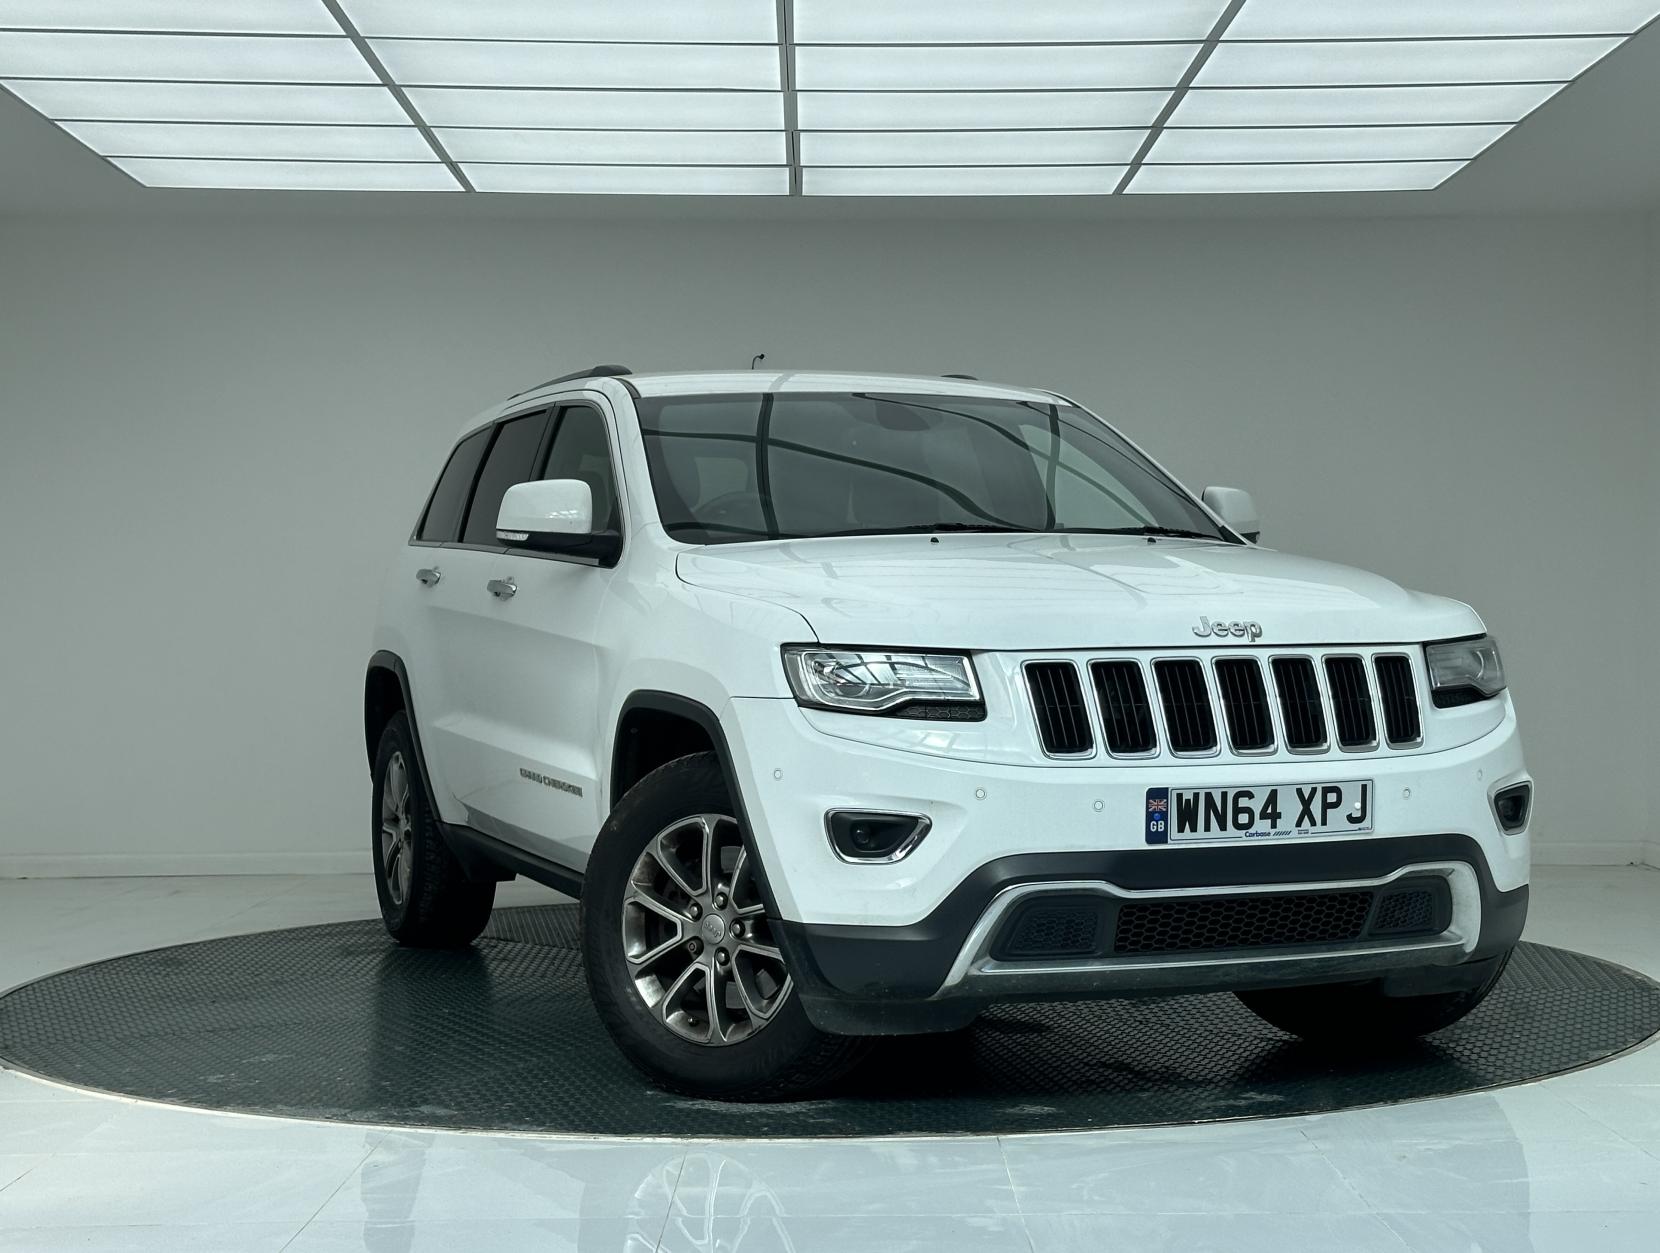 Jeep Grand Cherokee 3.0 V6 CRD Limited SUV 5dr Diesel Auto 4WD Euro 5 (247 bhp)